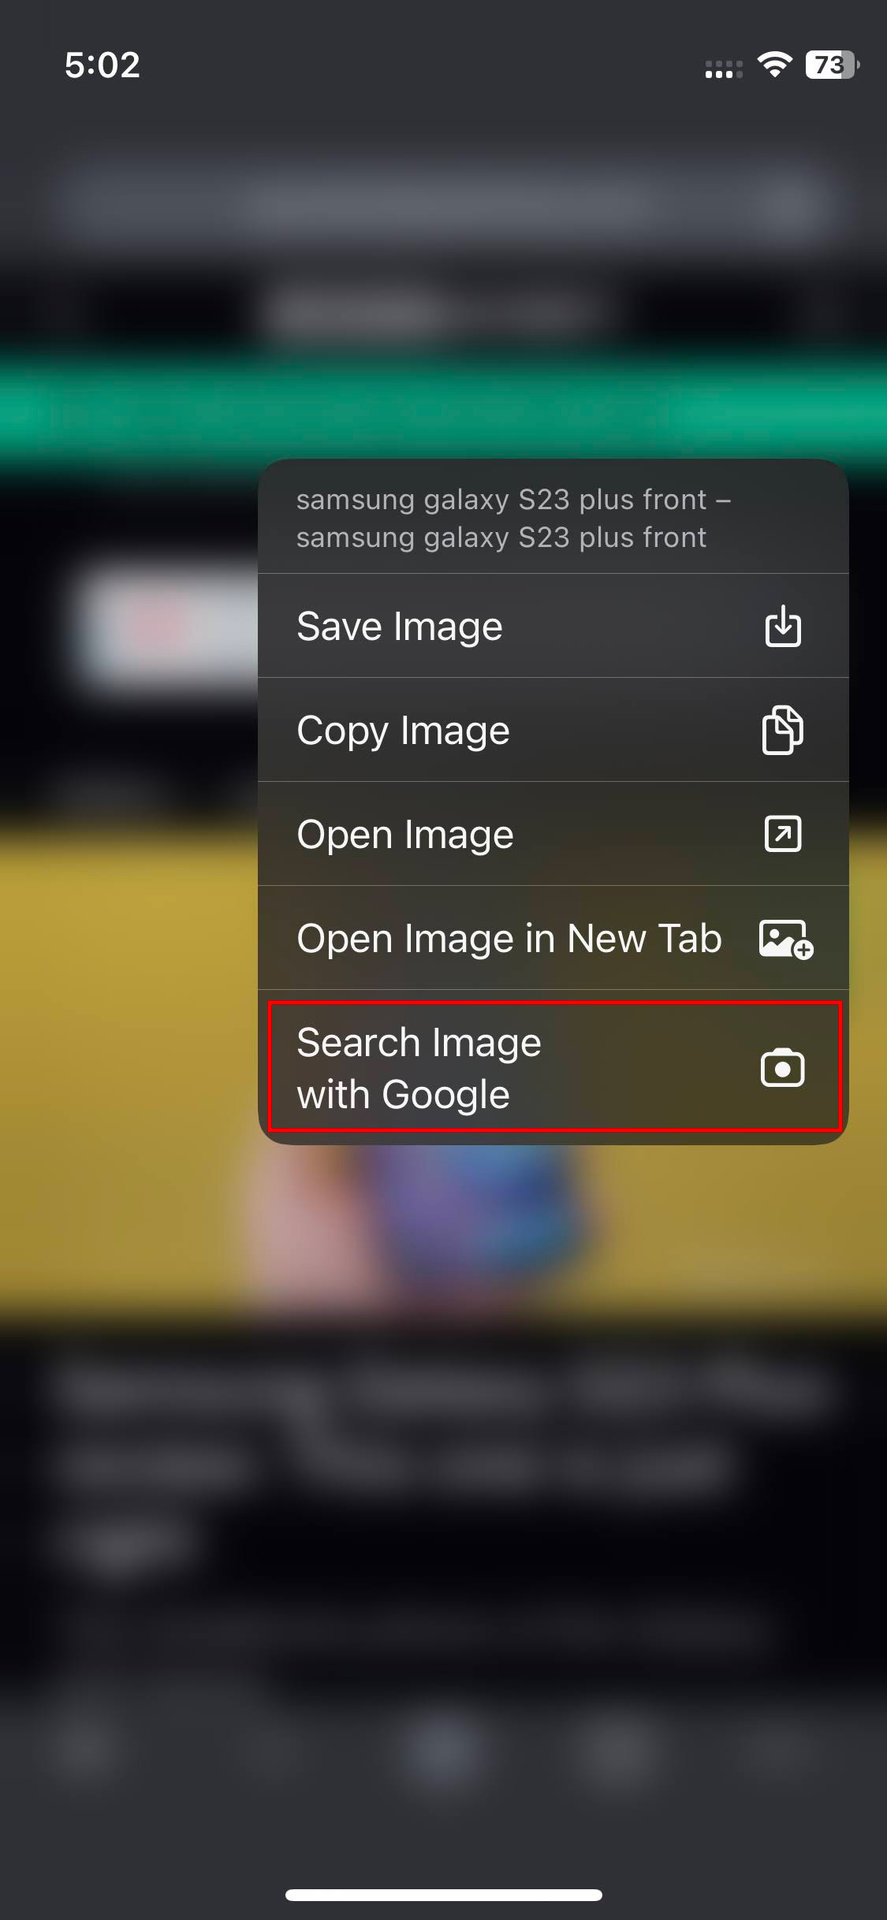 How to search image with Google on Chrome for iOS 2